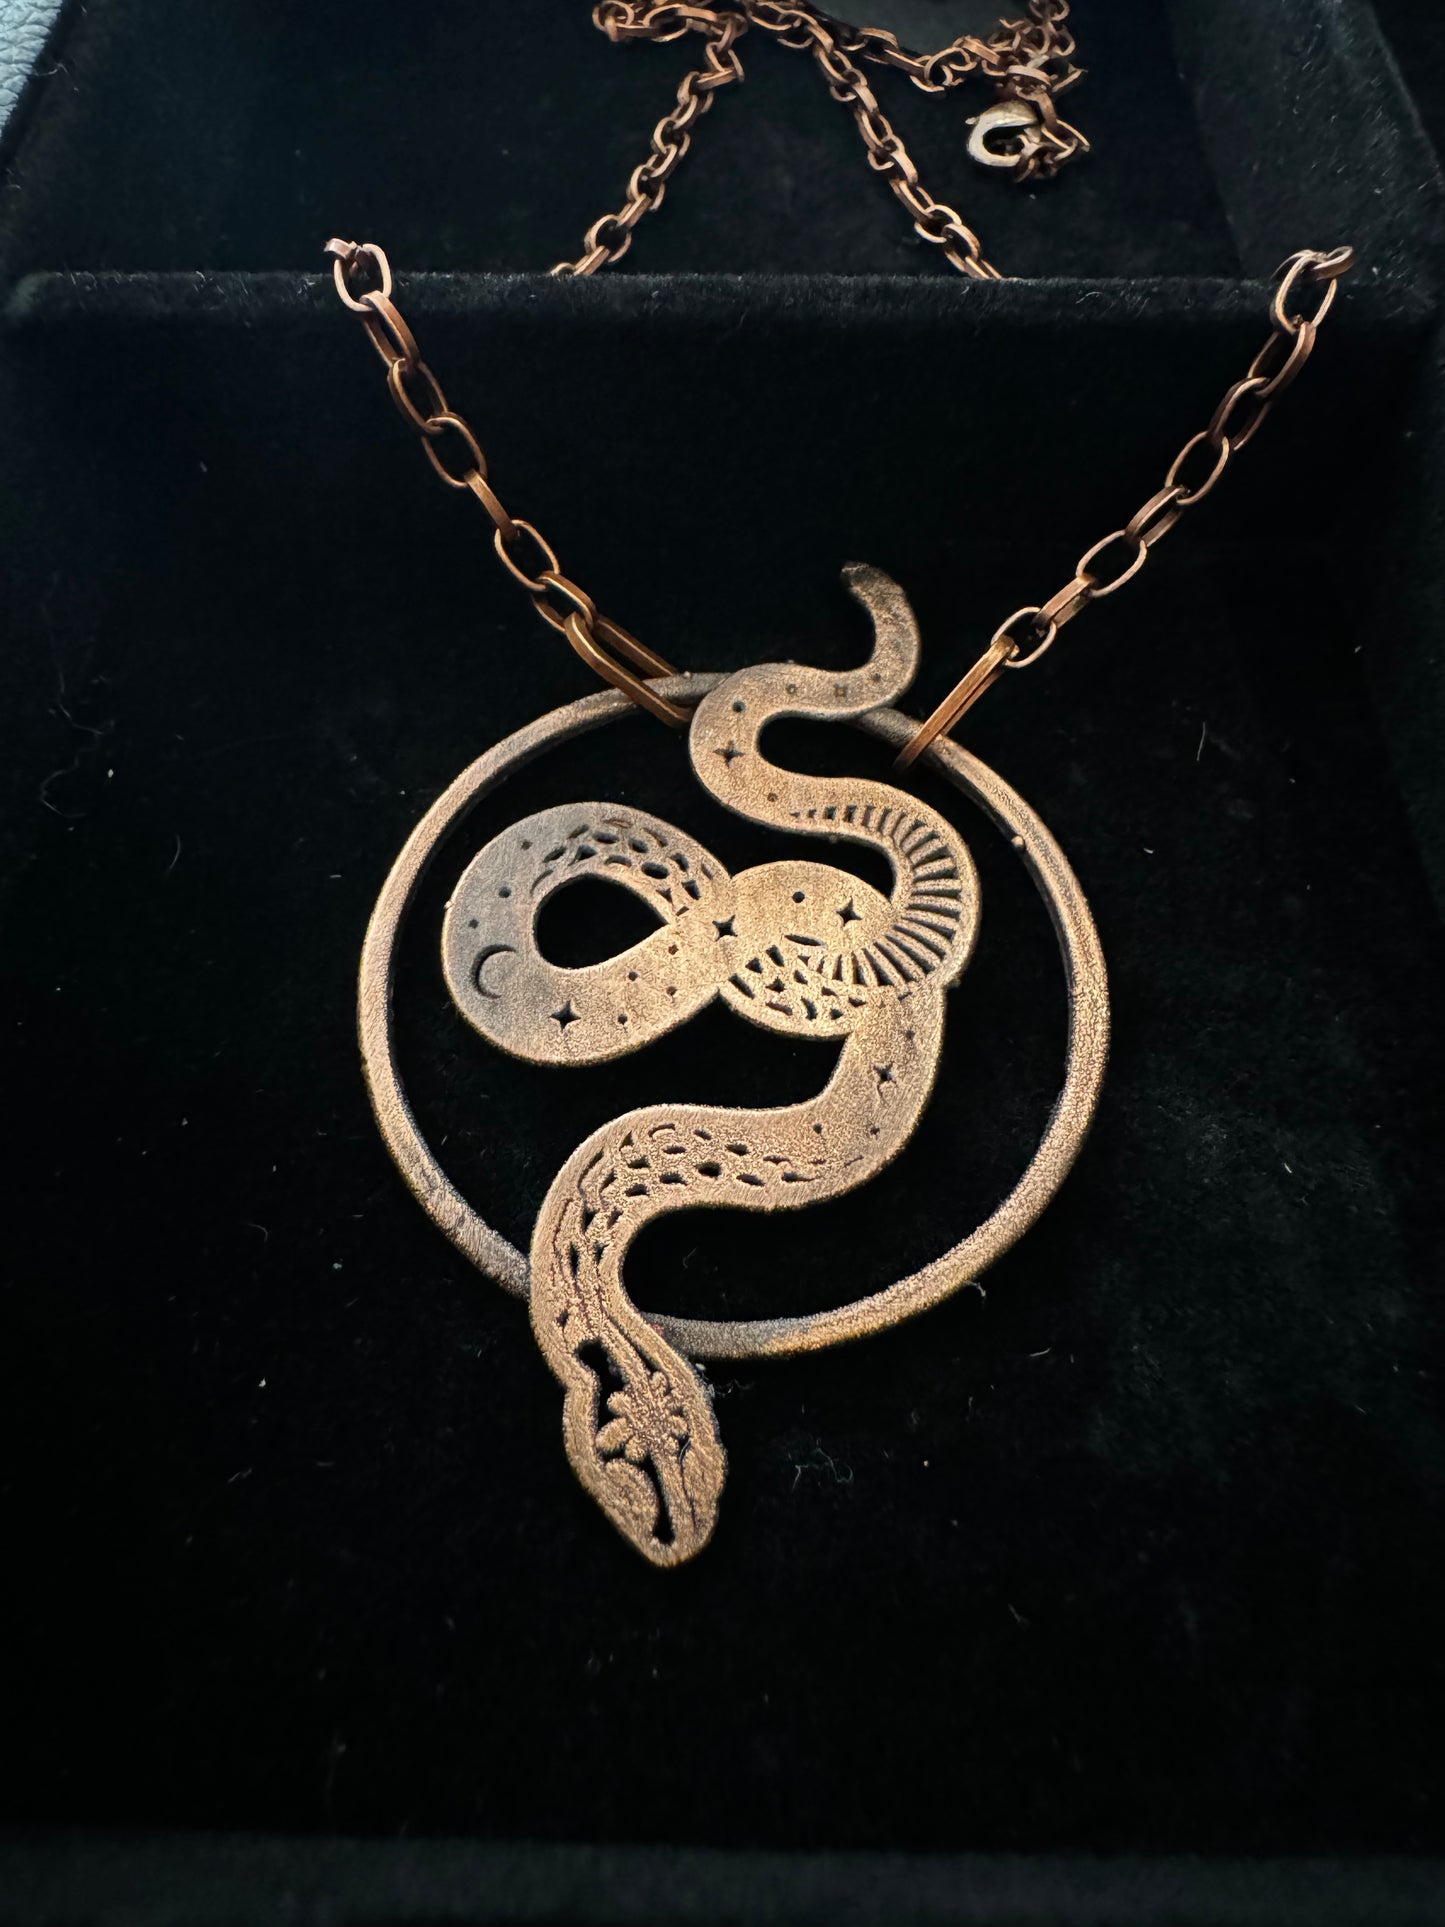 Serpent Necklace Collection: Handmade Copper Snakes by Lory Sun